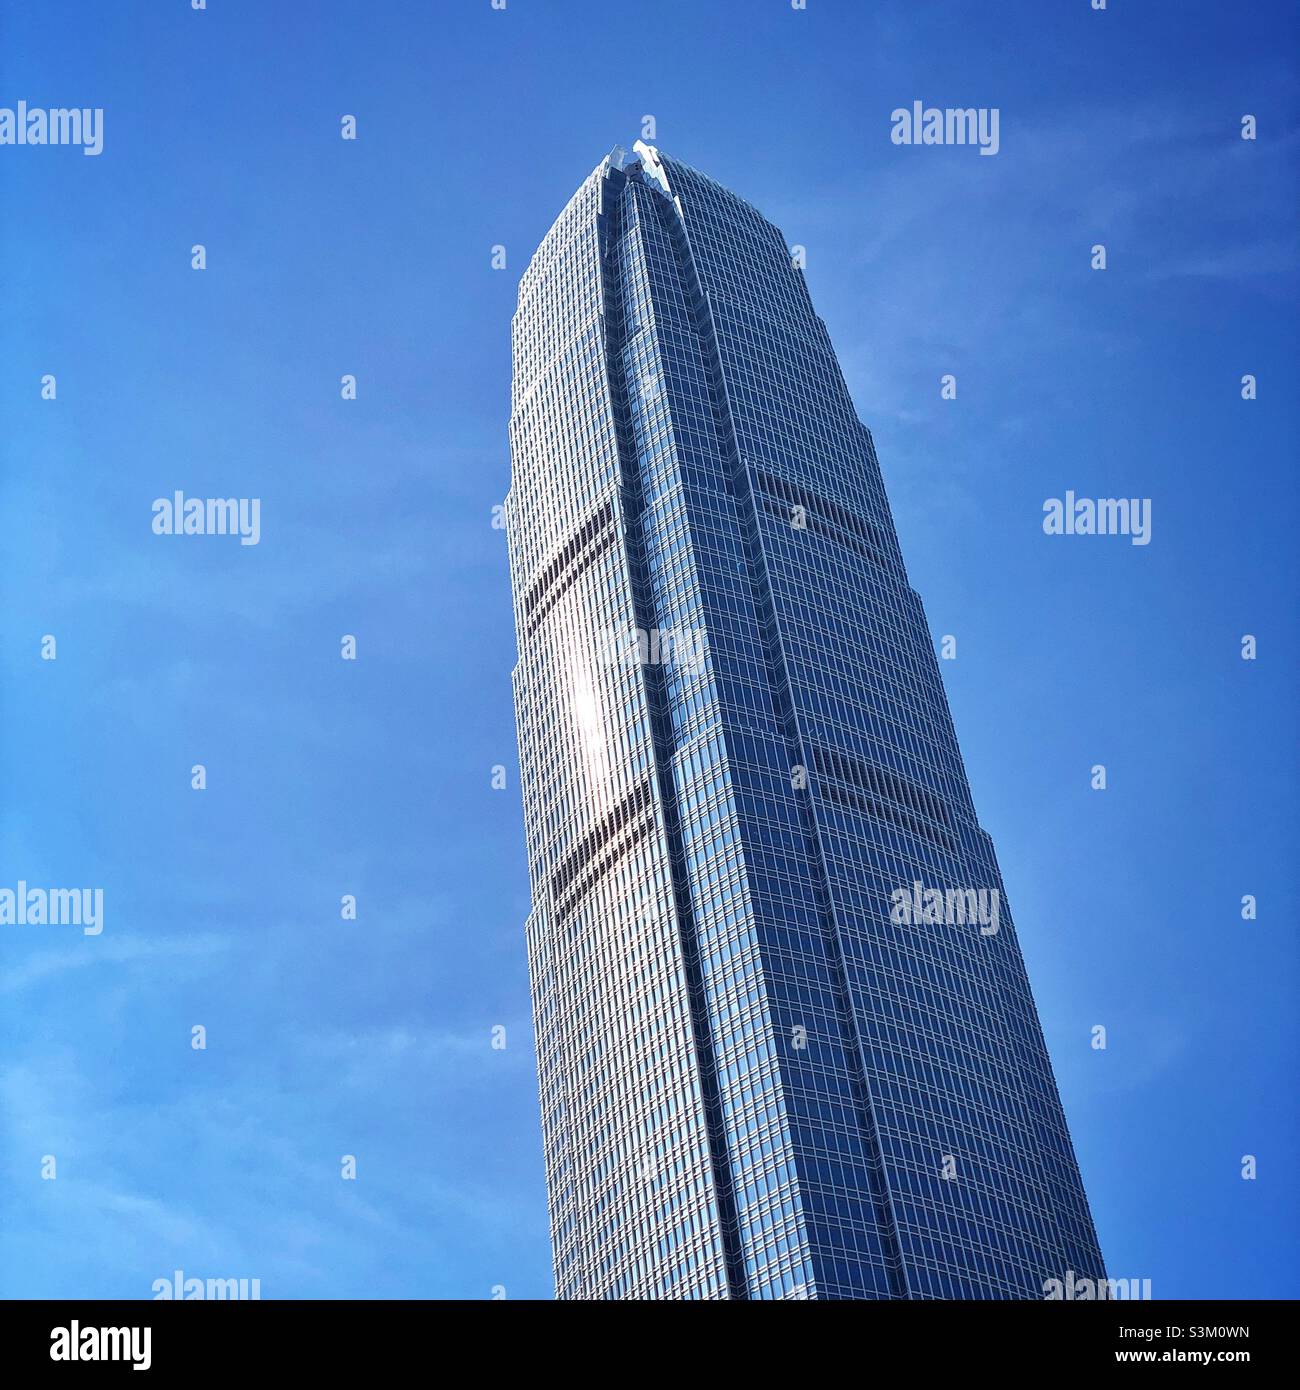 2ifc (2 International Finance Centre), a skyscraper in Central, Hong Kong's second tallest building Stock Photo